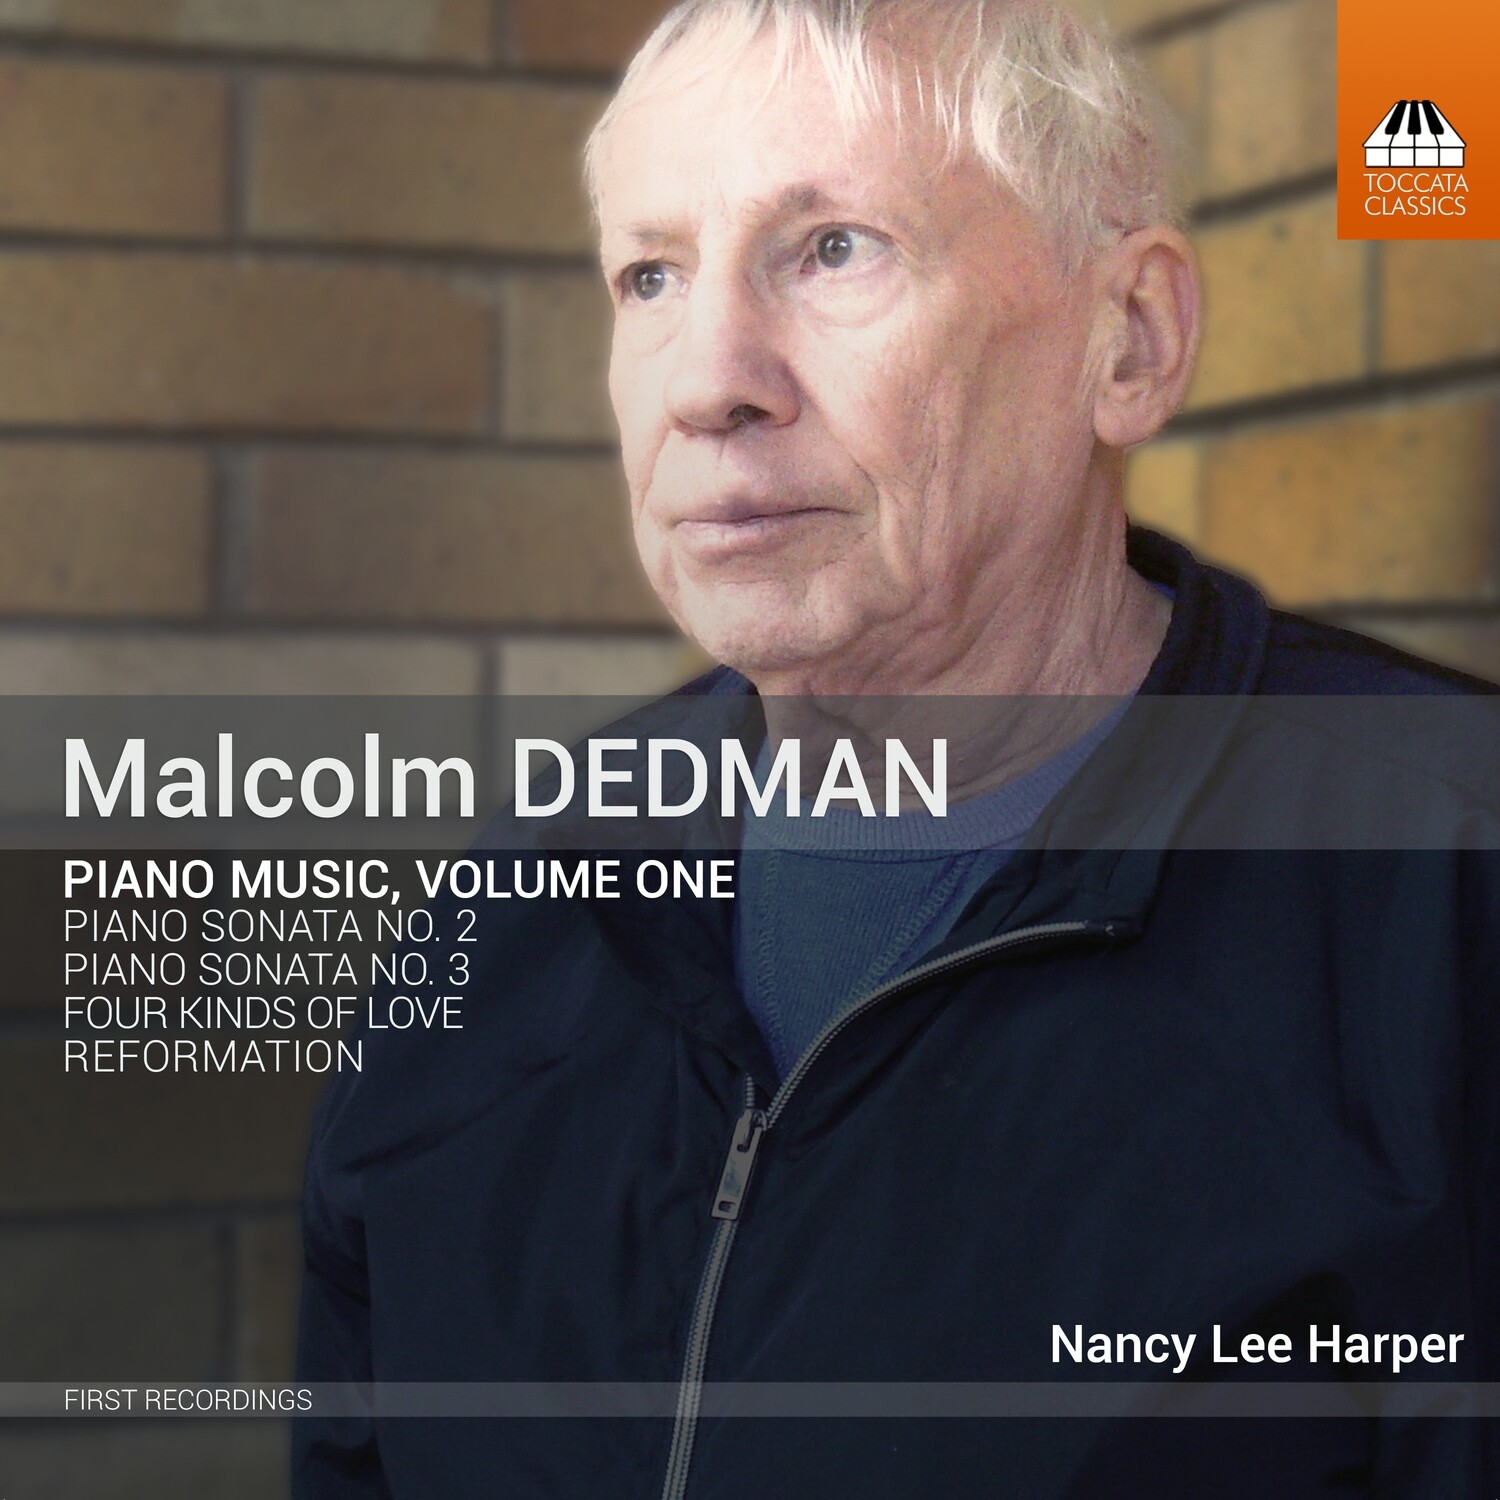 CD, volume 1 of  piano music by Malcolm Dedman